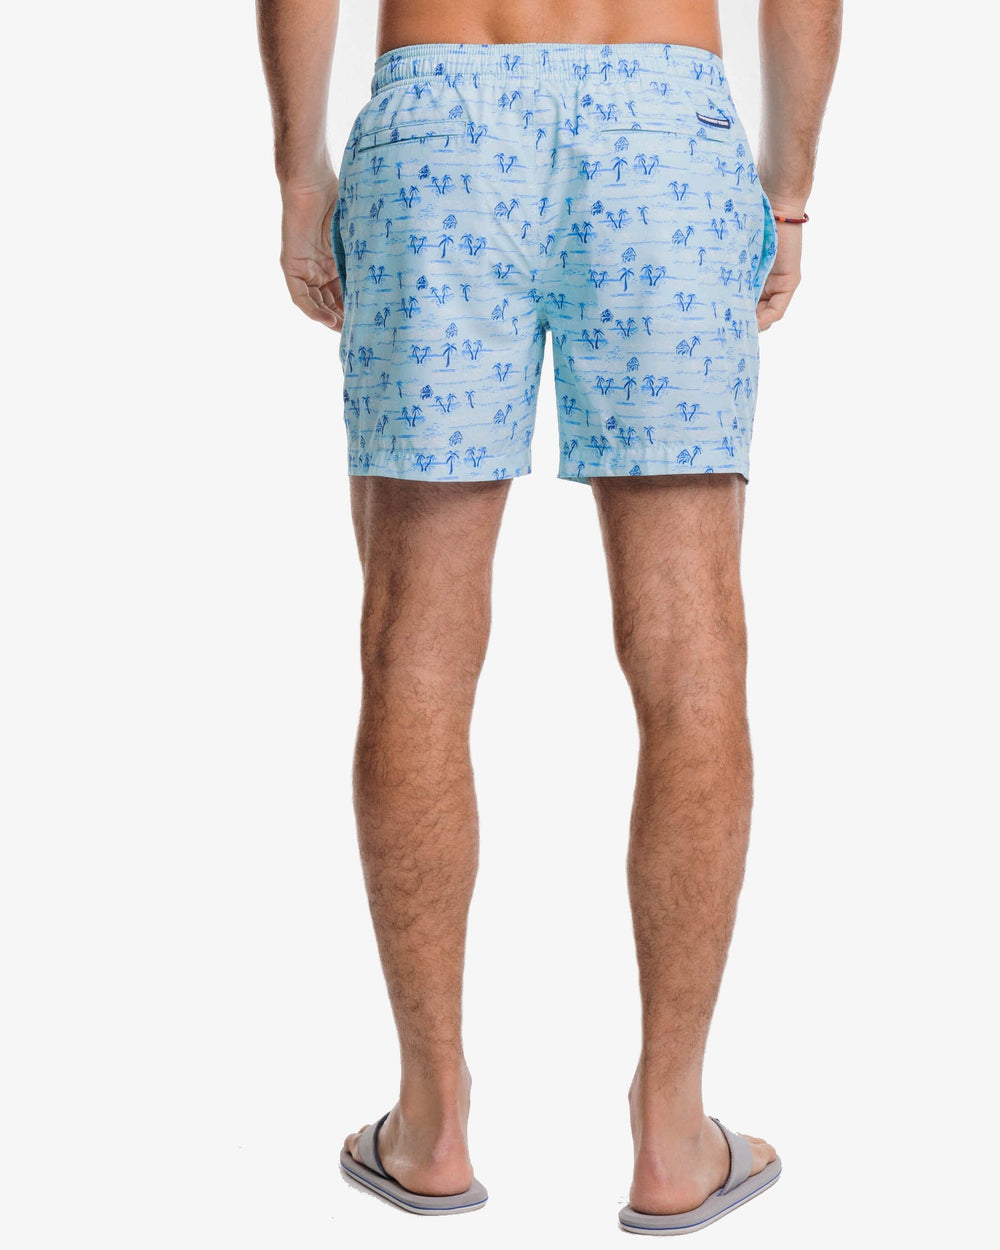 The back view of the Southern Tide Nice to Sea You Printed Swim Trunk by Southern Tide - Baltic Teal